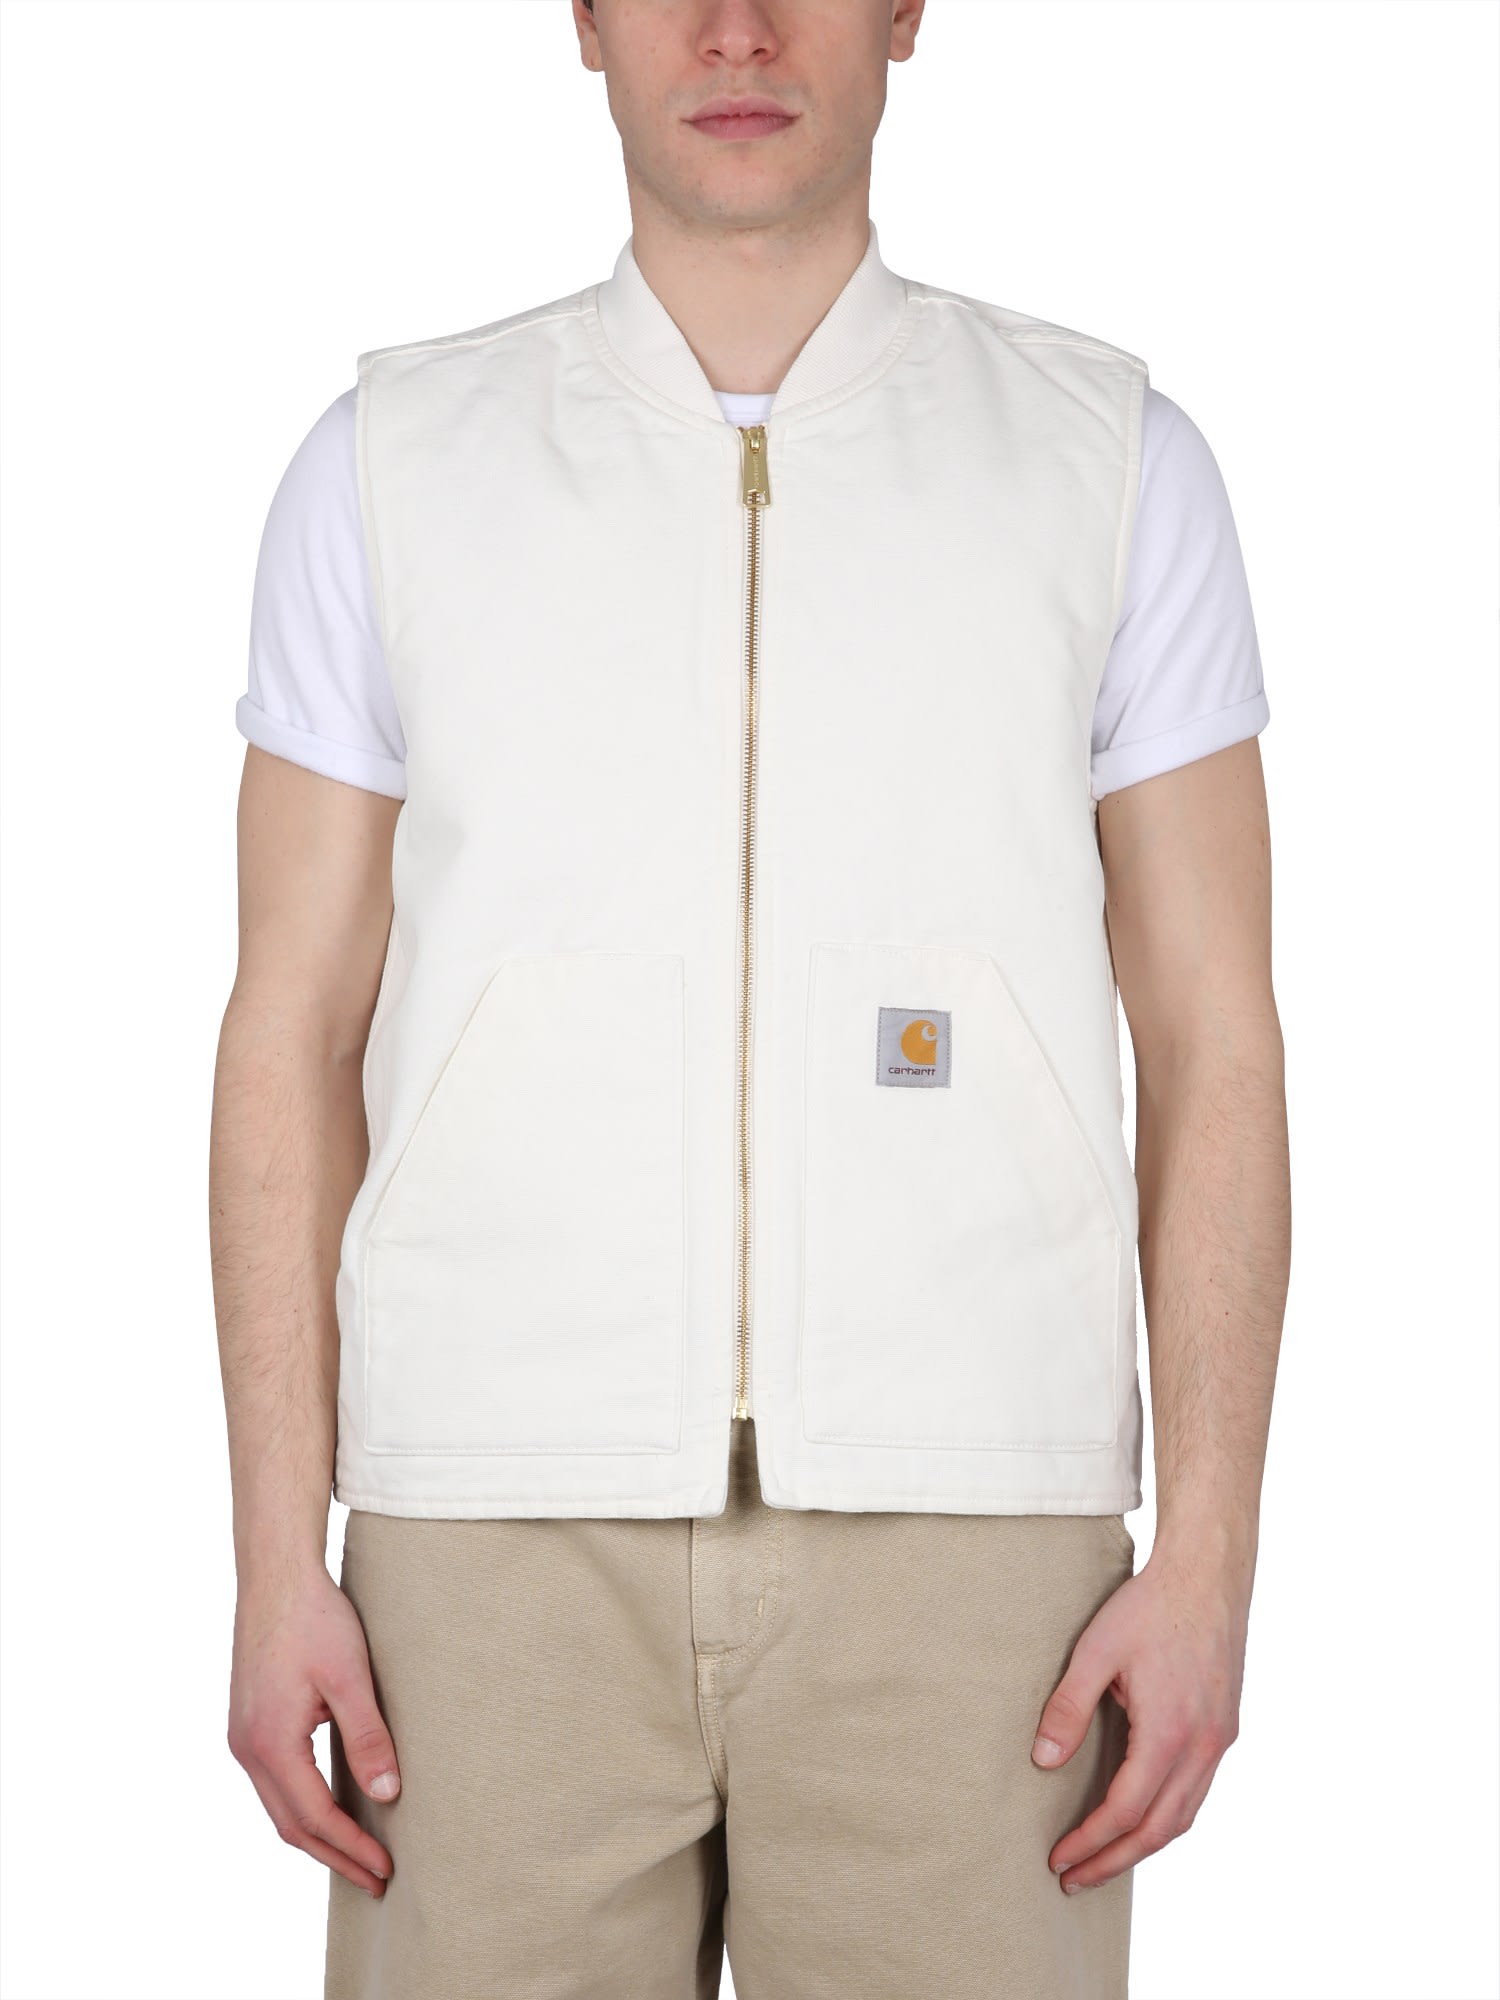 CARHARTT VEST WITH LOGO PATCH